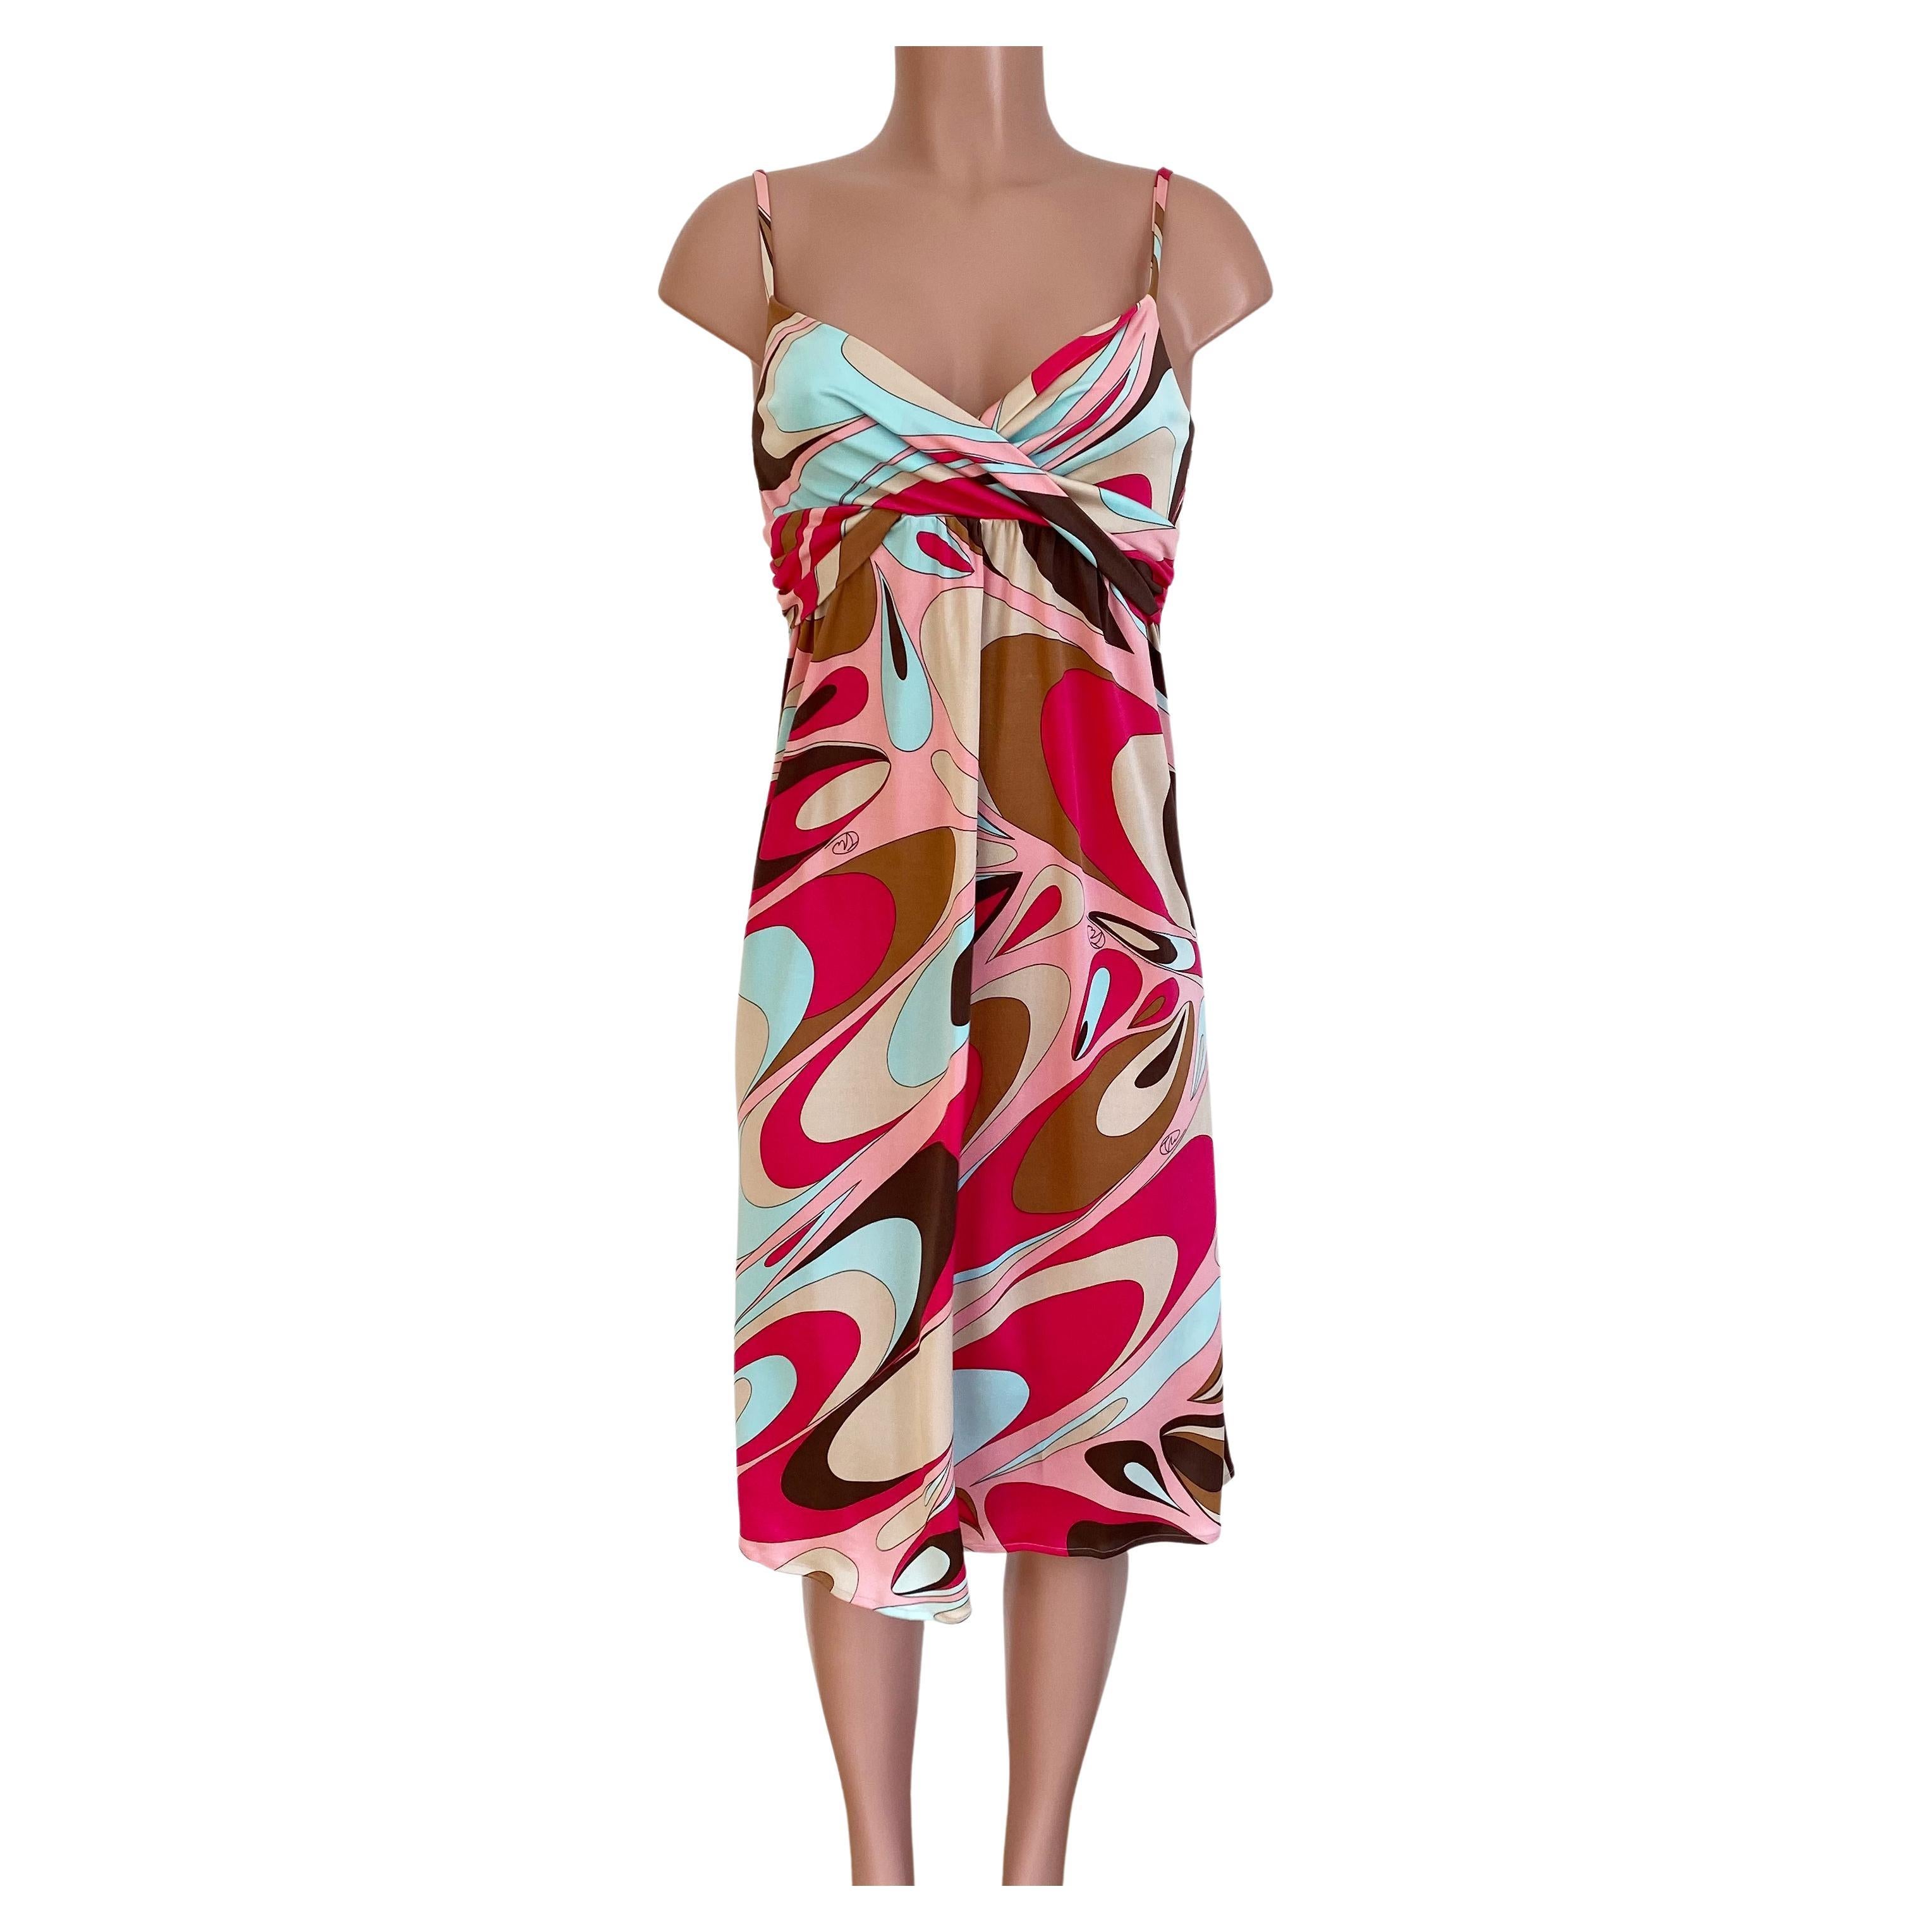 Twist front slip dress with adjustable shoulder straps for a perfect, flattering fit.
Gelato swirl print in pink, mocha and mint.
Approximately 45